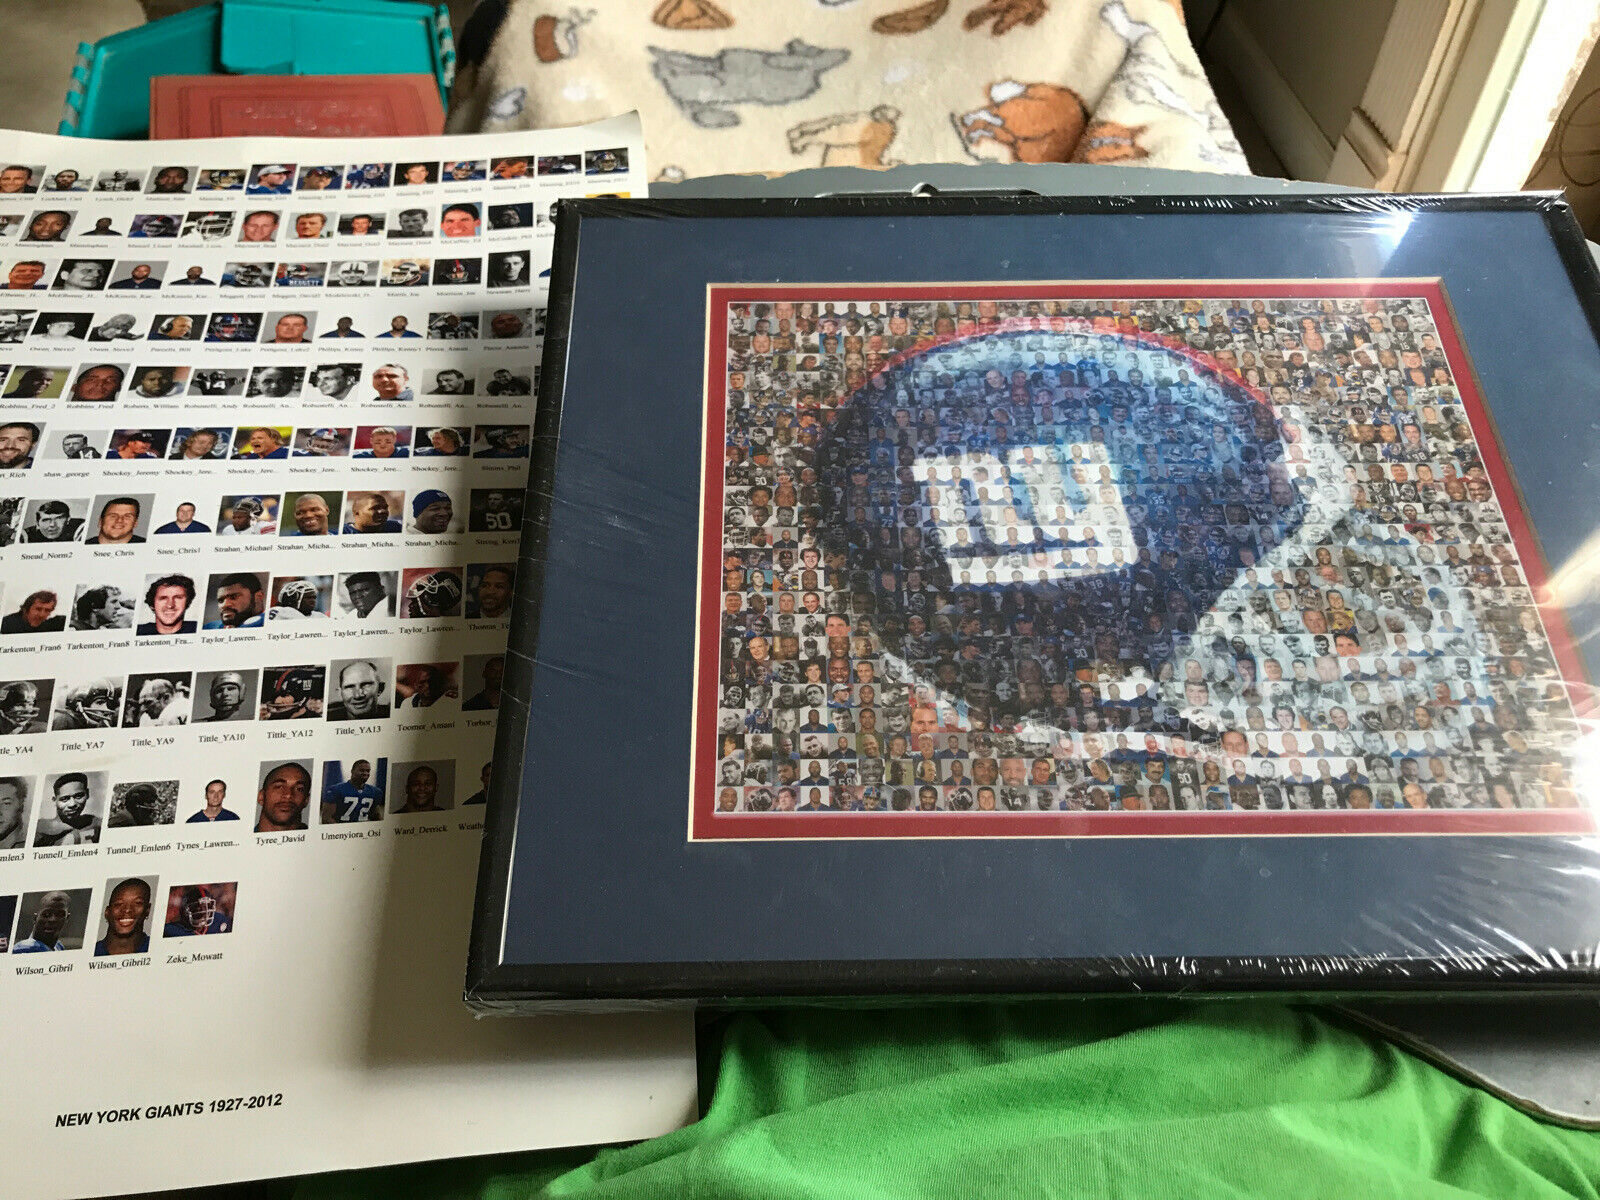 2012 Super Bowl Xlvi Champions Ny Giants Framed Picture And 1927 -2012 2 Sided